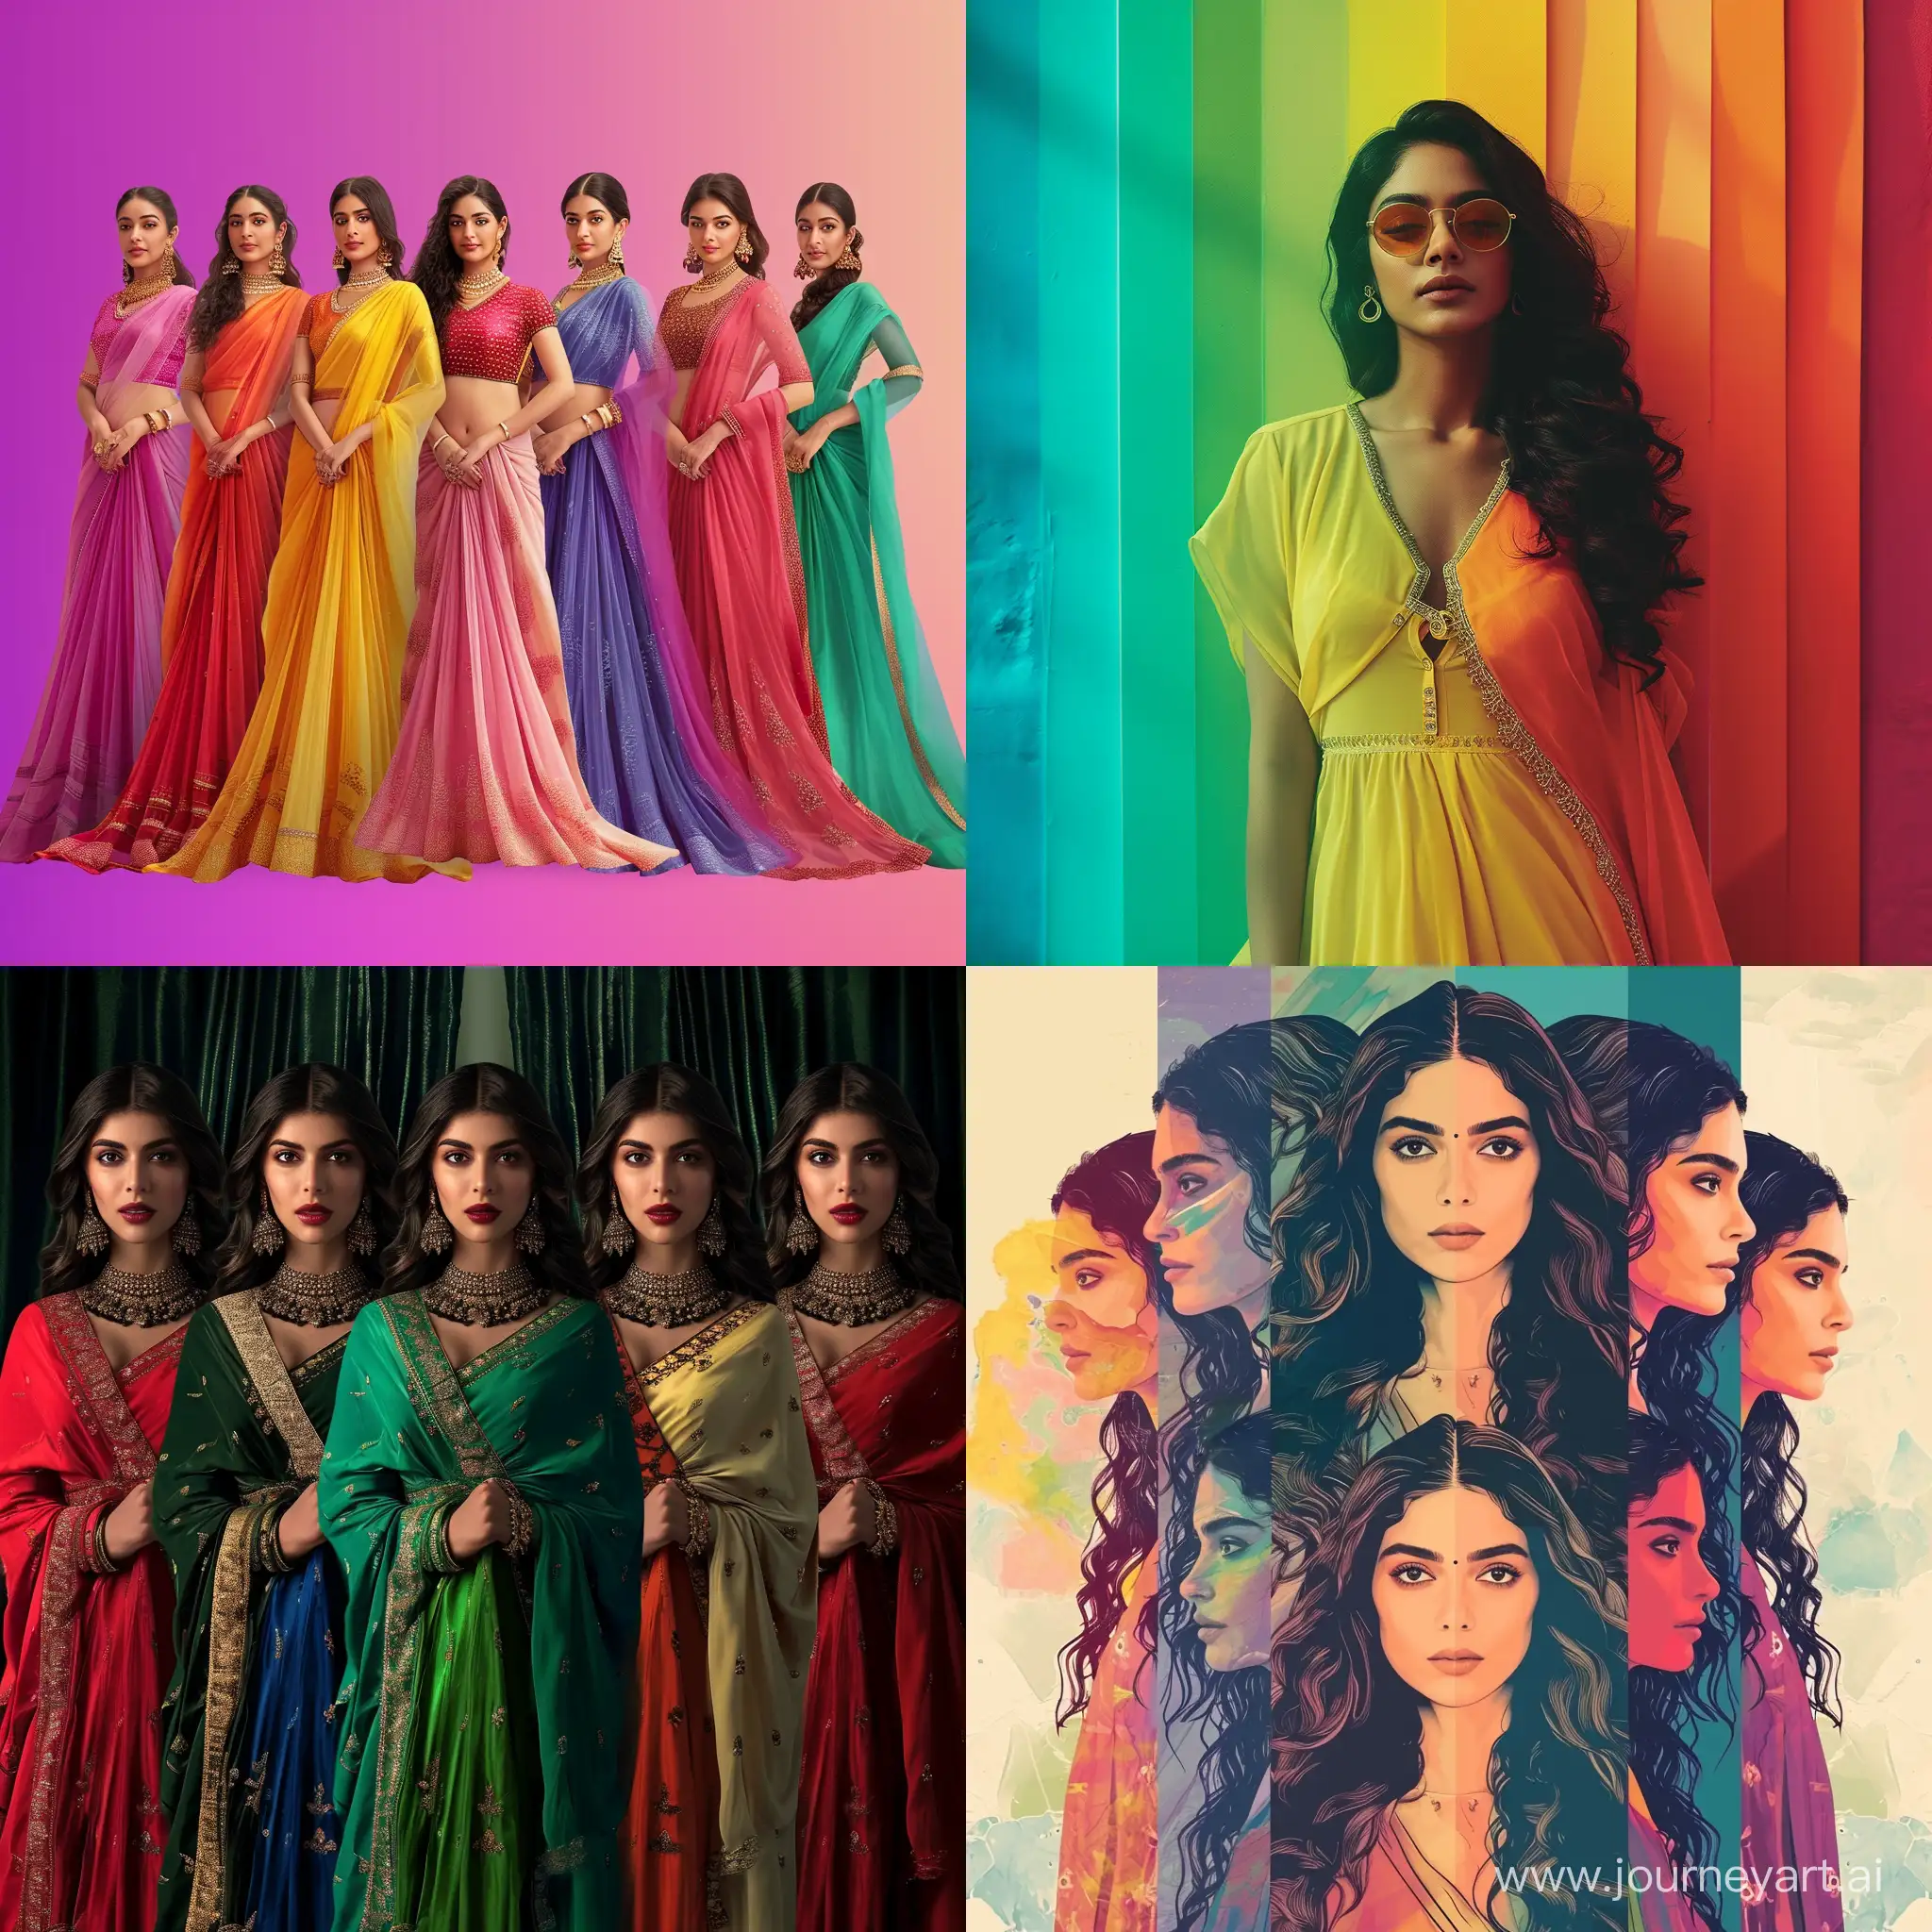 Celebrating-Diversity-Myntra-Banner-Featuring-Multicultural-Women-in-Vibrant-Hues